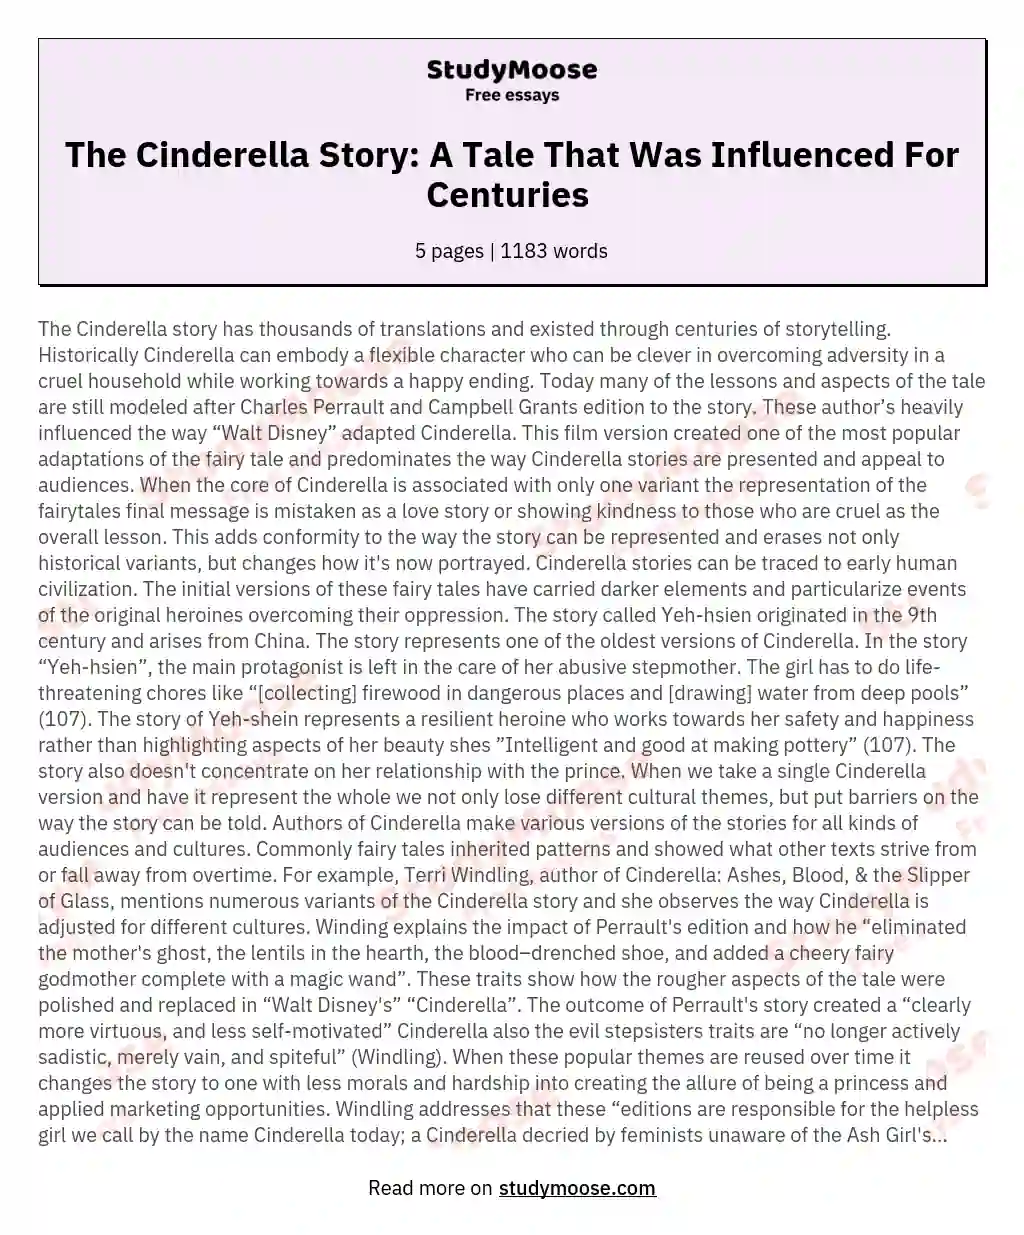 The Cinderella Story: A Tale That Was Influenced For Centuries 